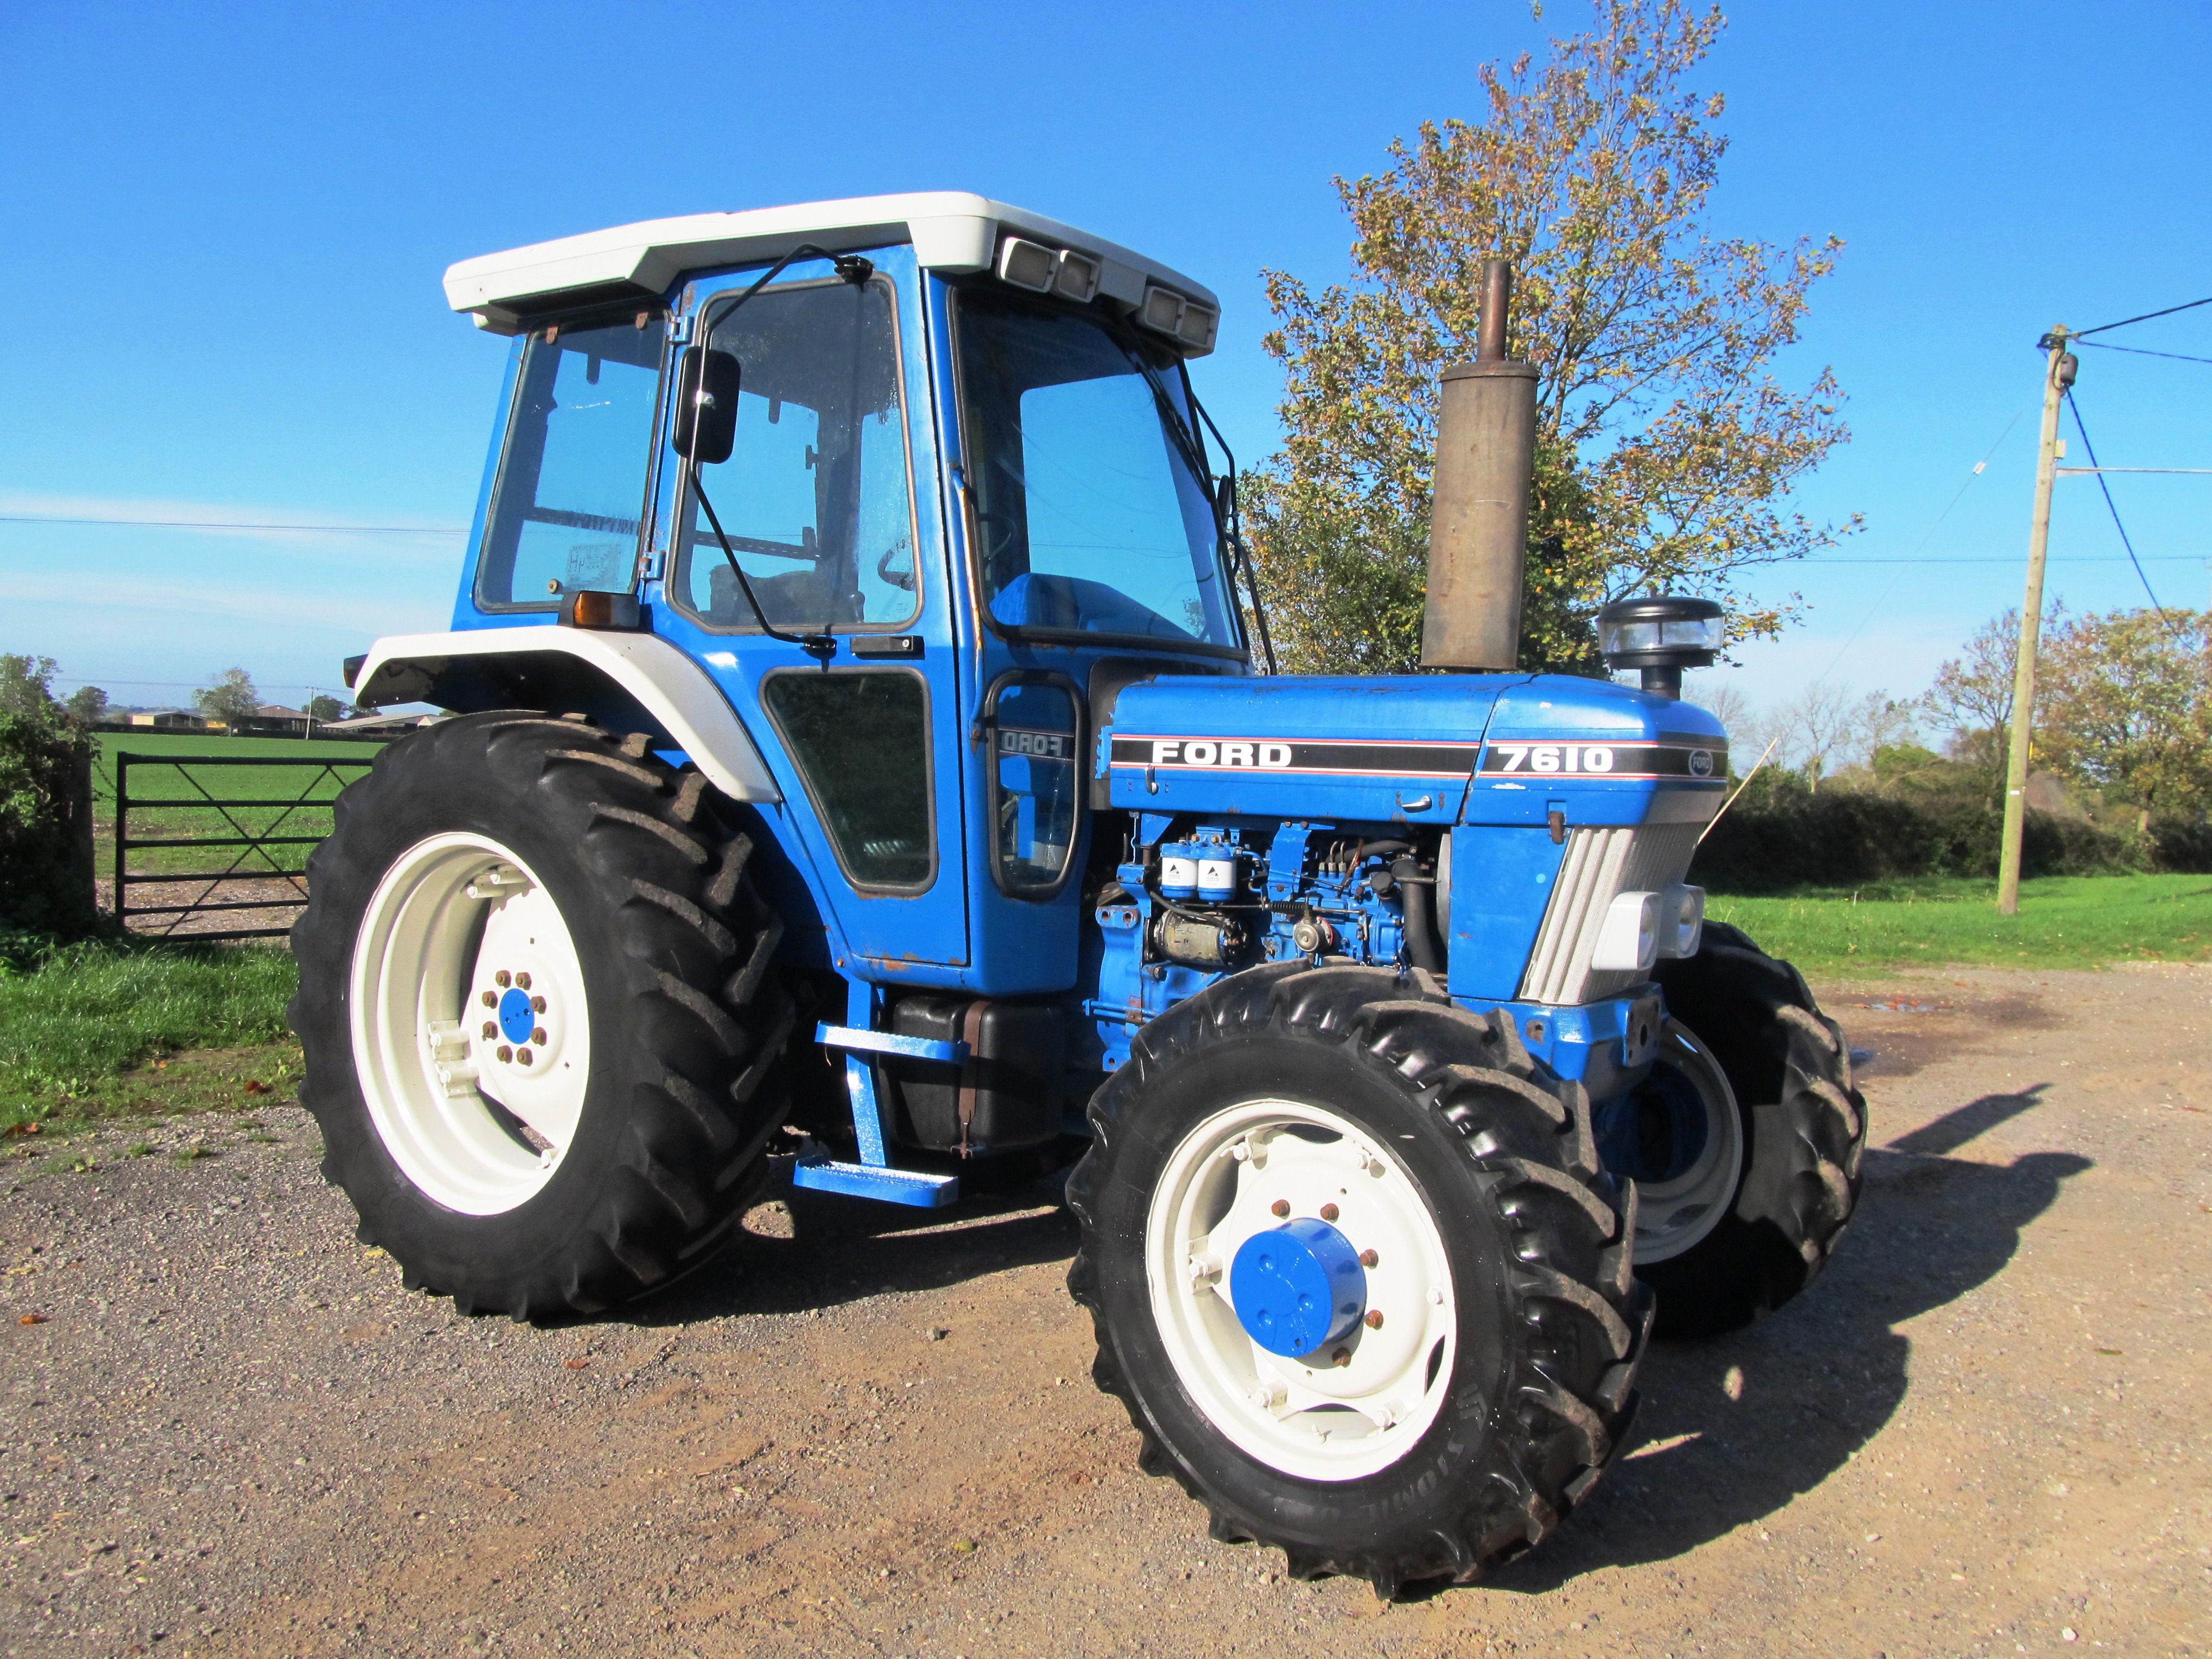 Ford 7610 4wd tractor